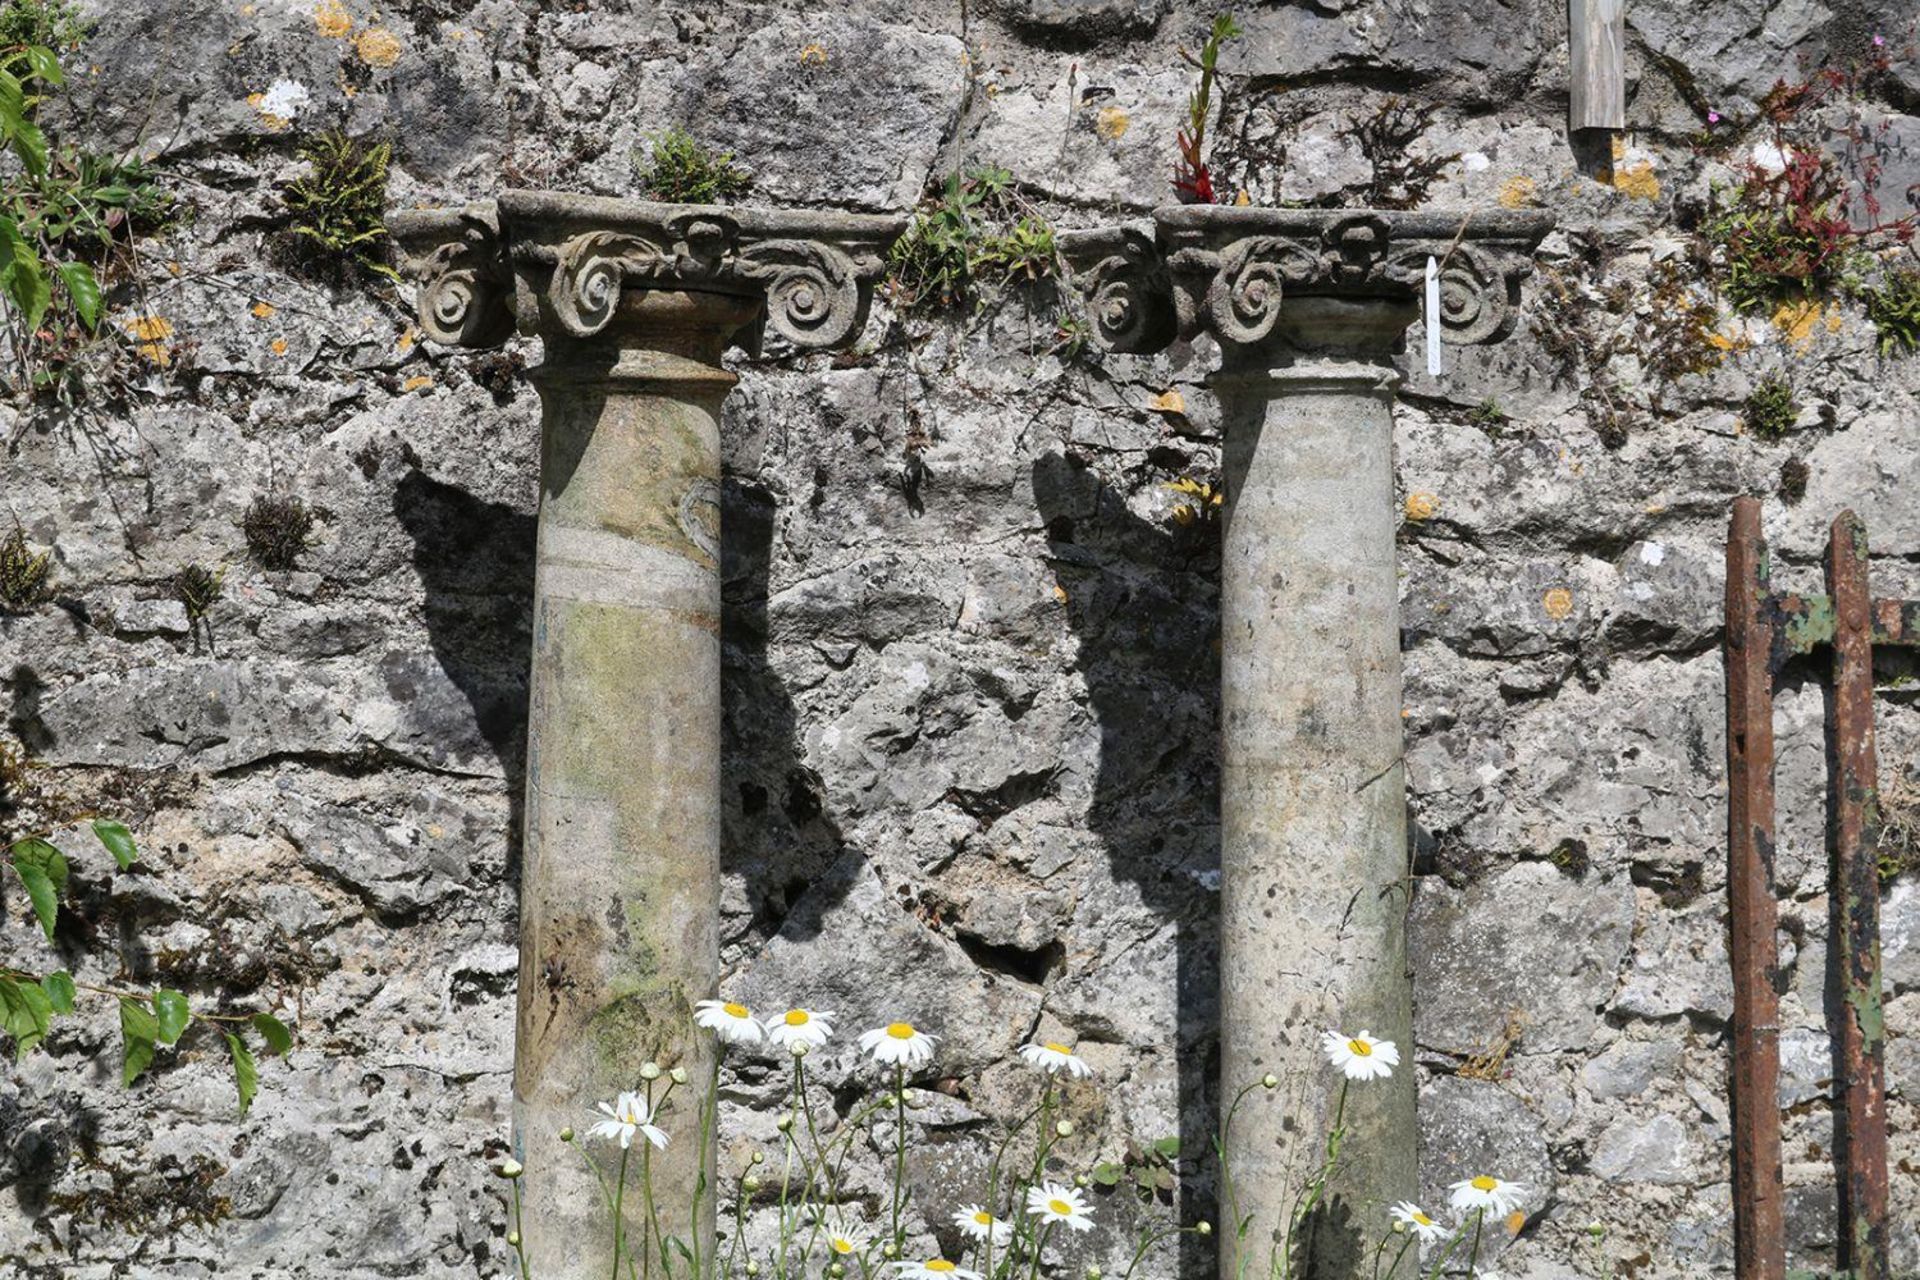 SET OF 4 COMPOSITE STONE CLASSICAL COLUMNS - Image 2 of 3